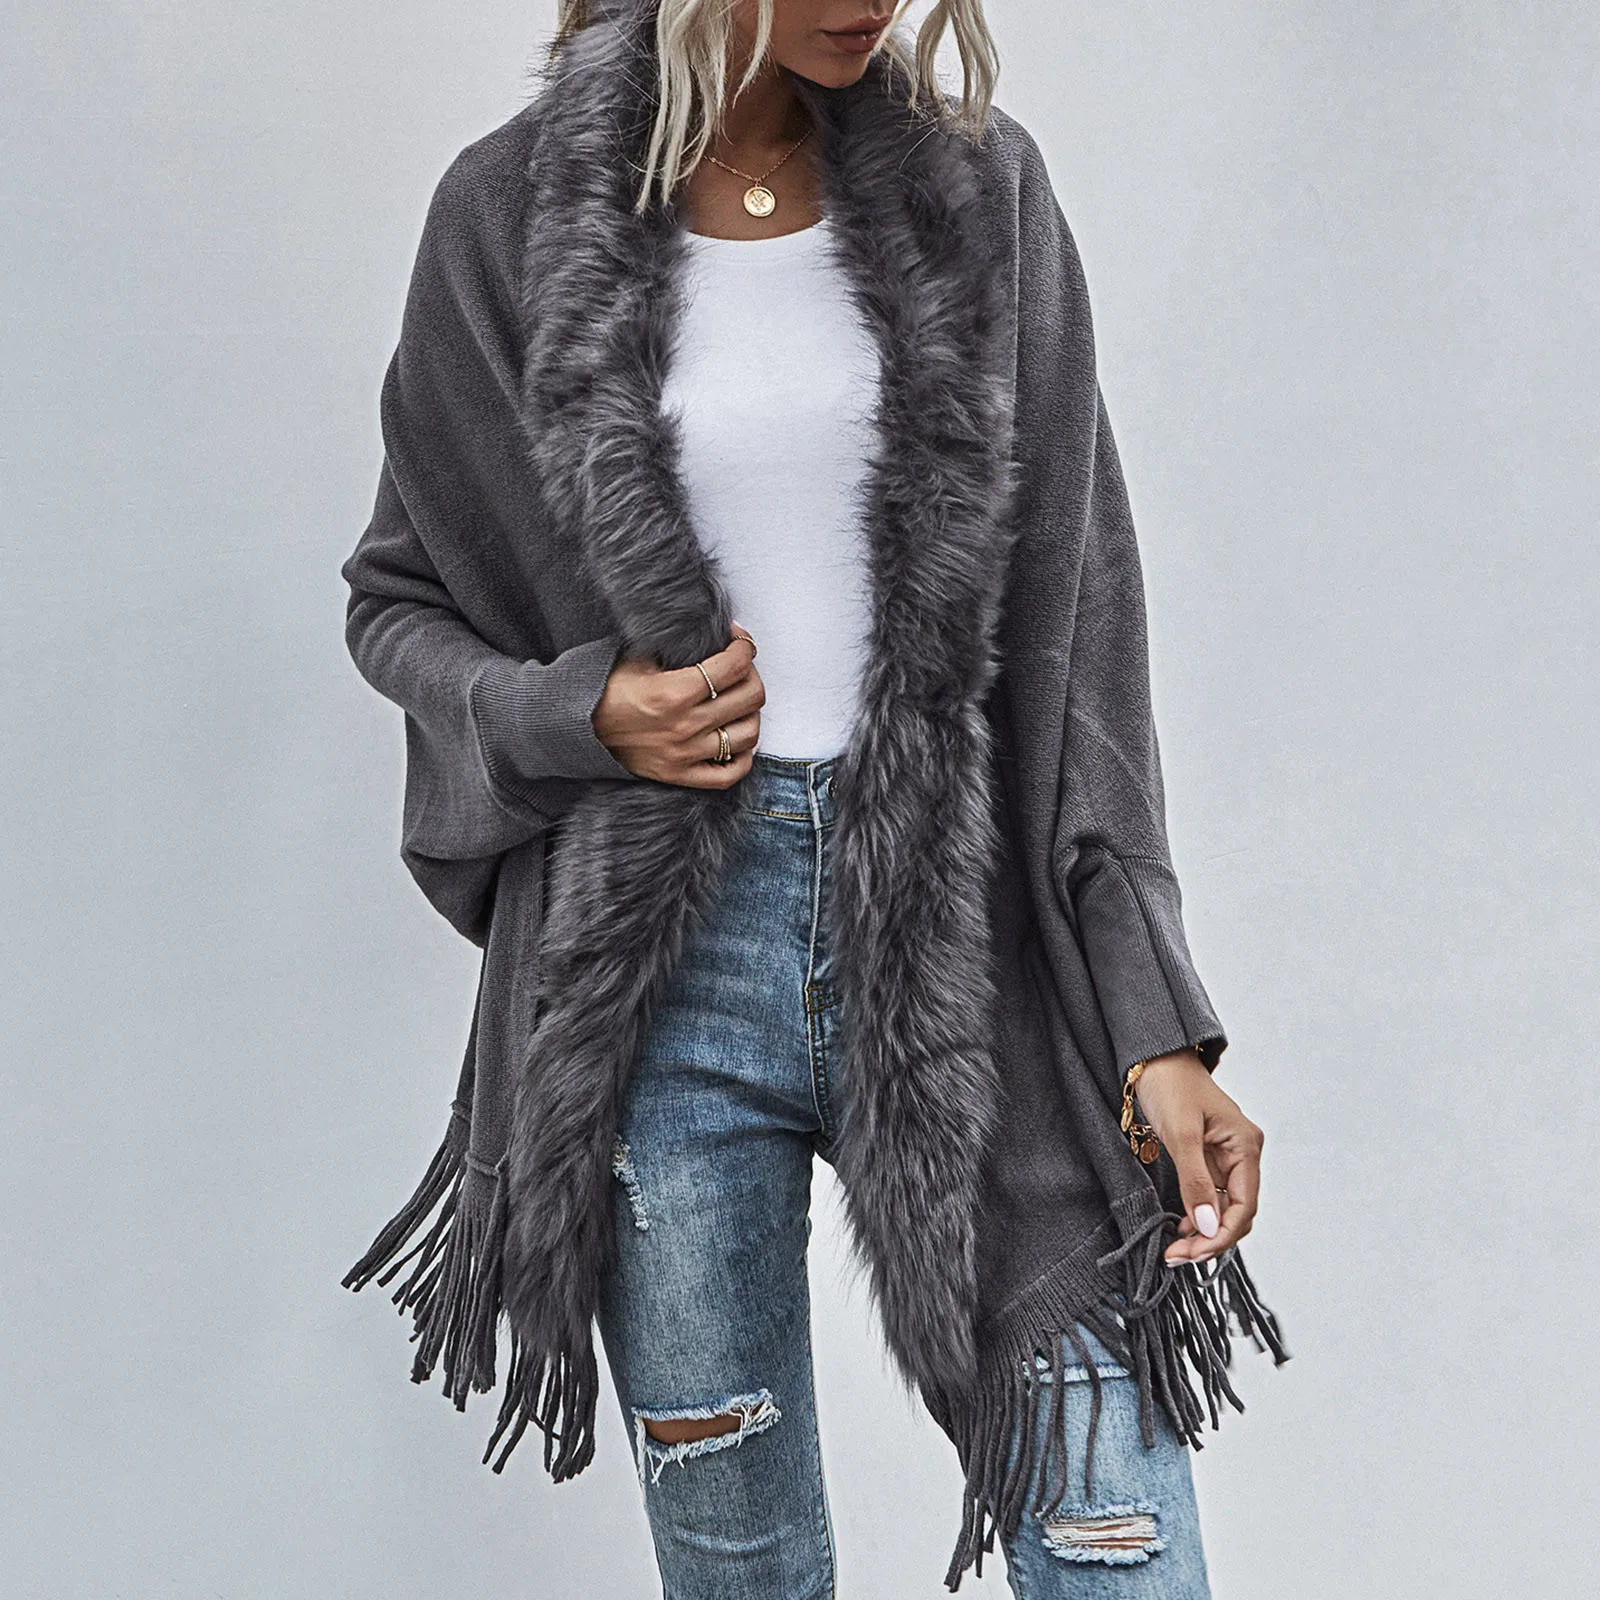 Faux Fur Collar Cardigan Poncho Tassel Trim Layered Knitted Cape Solid Sweater Coat Women Casual Loose Shawl Mid Length Jacket